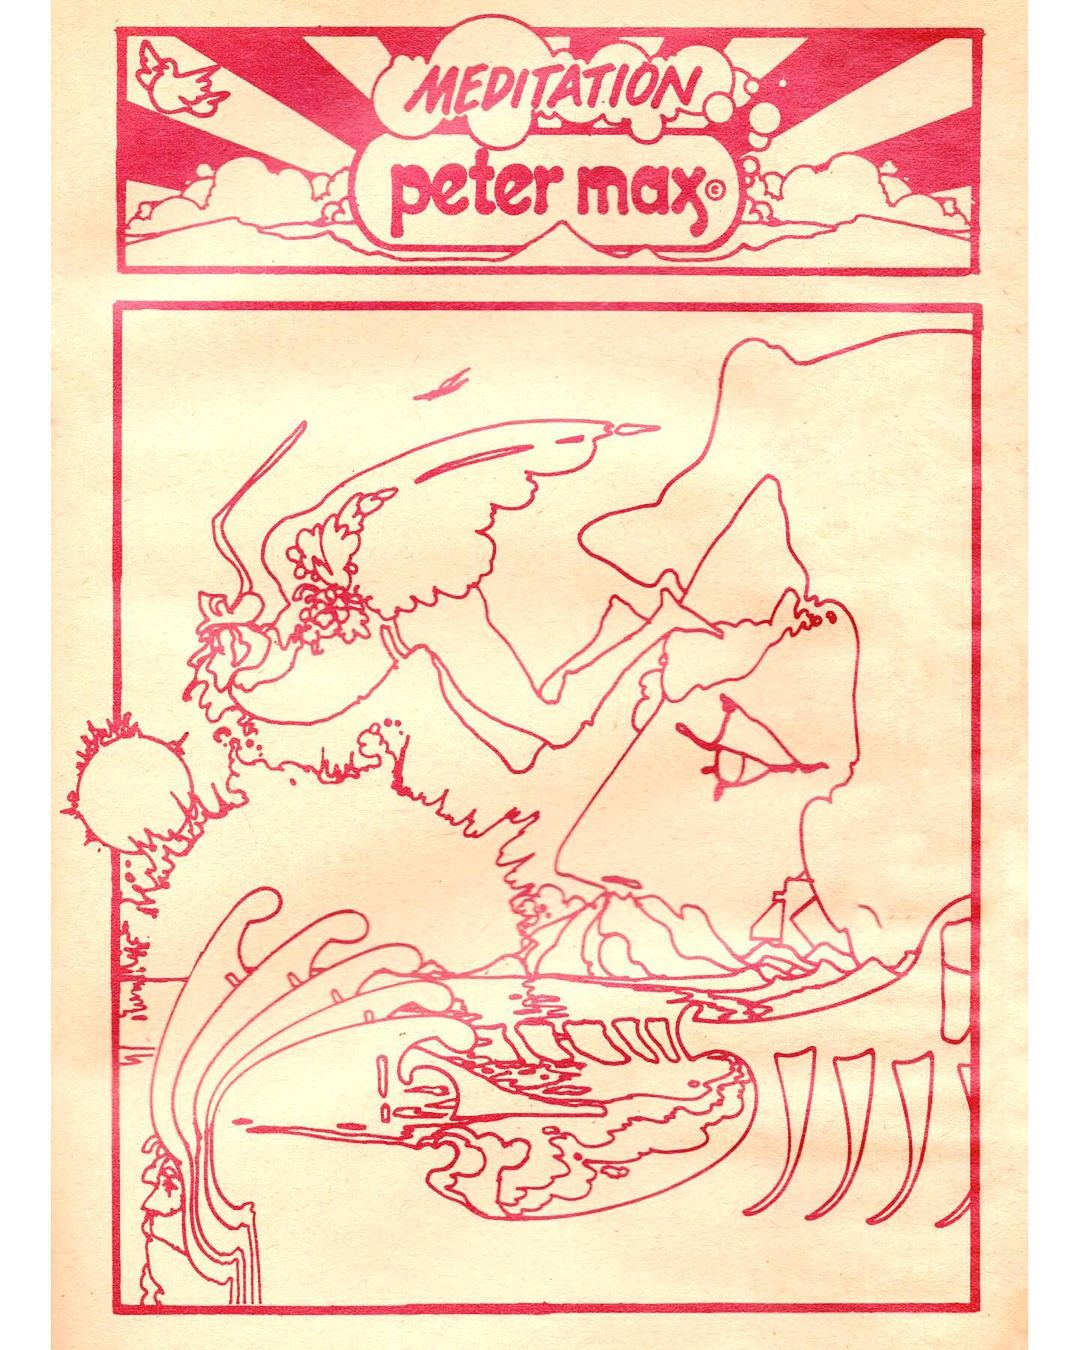 Peter Max Meditation and Maze, 1970